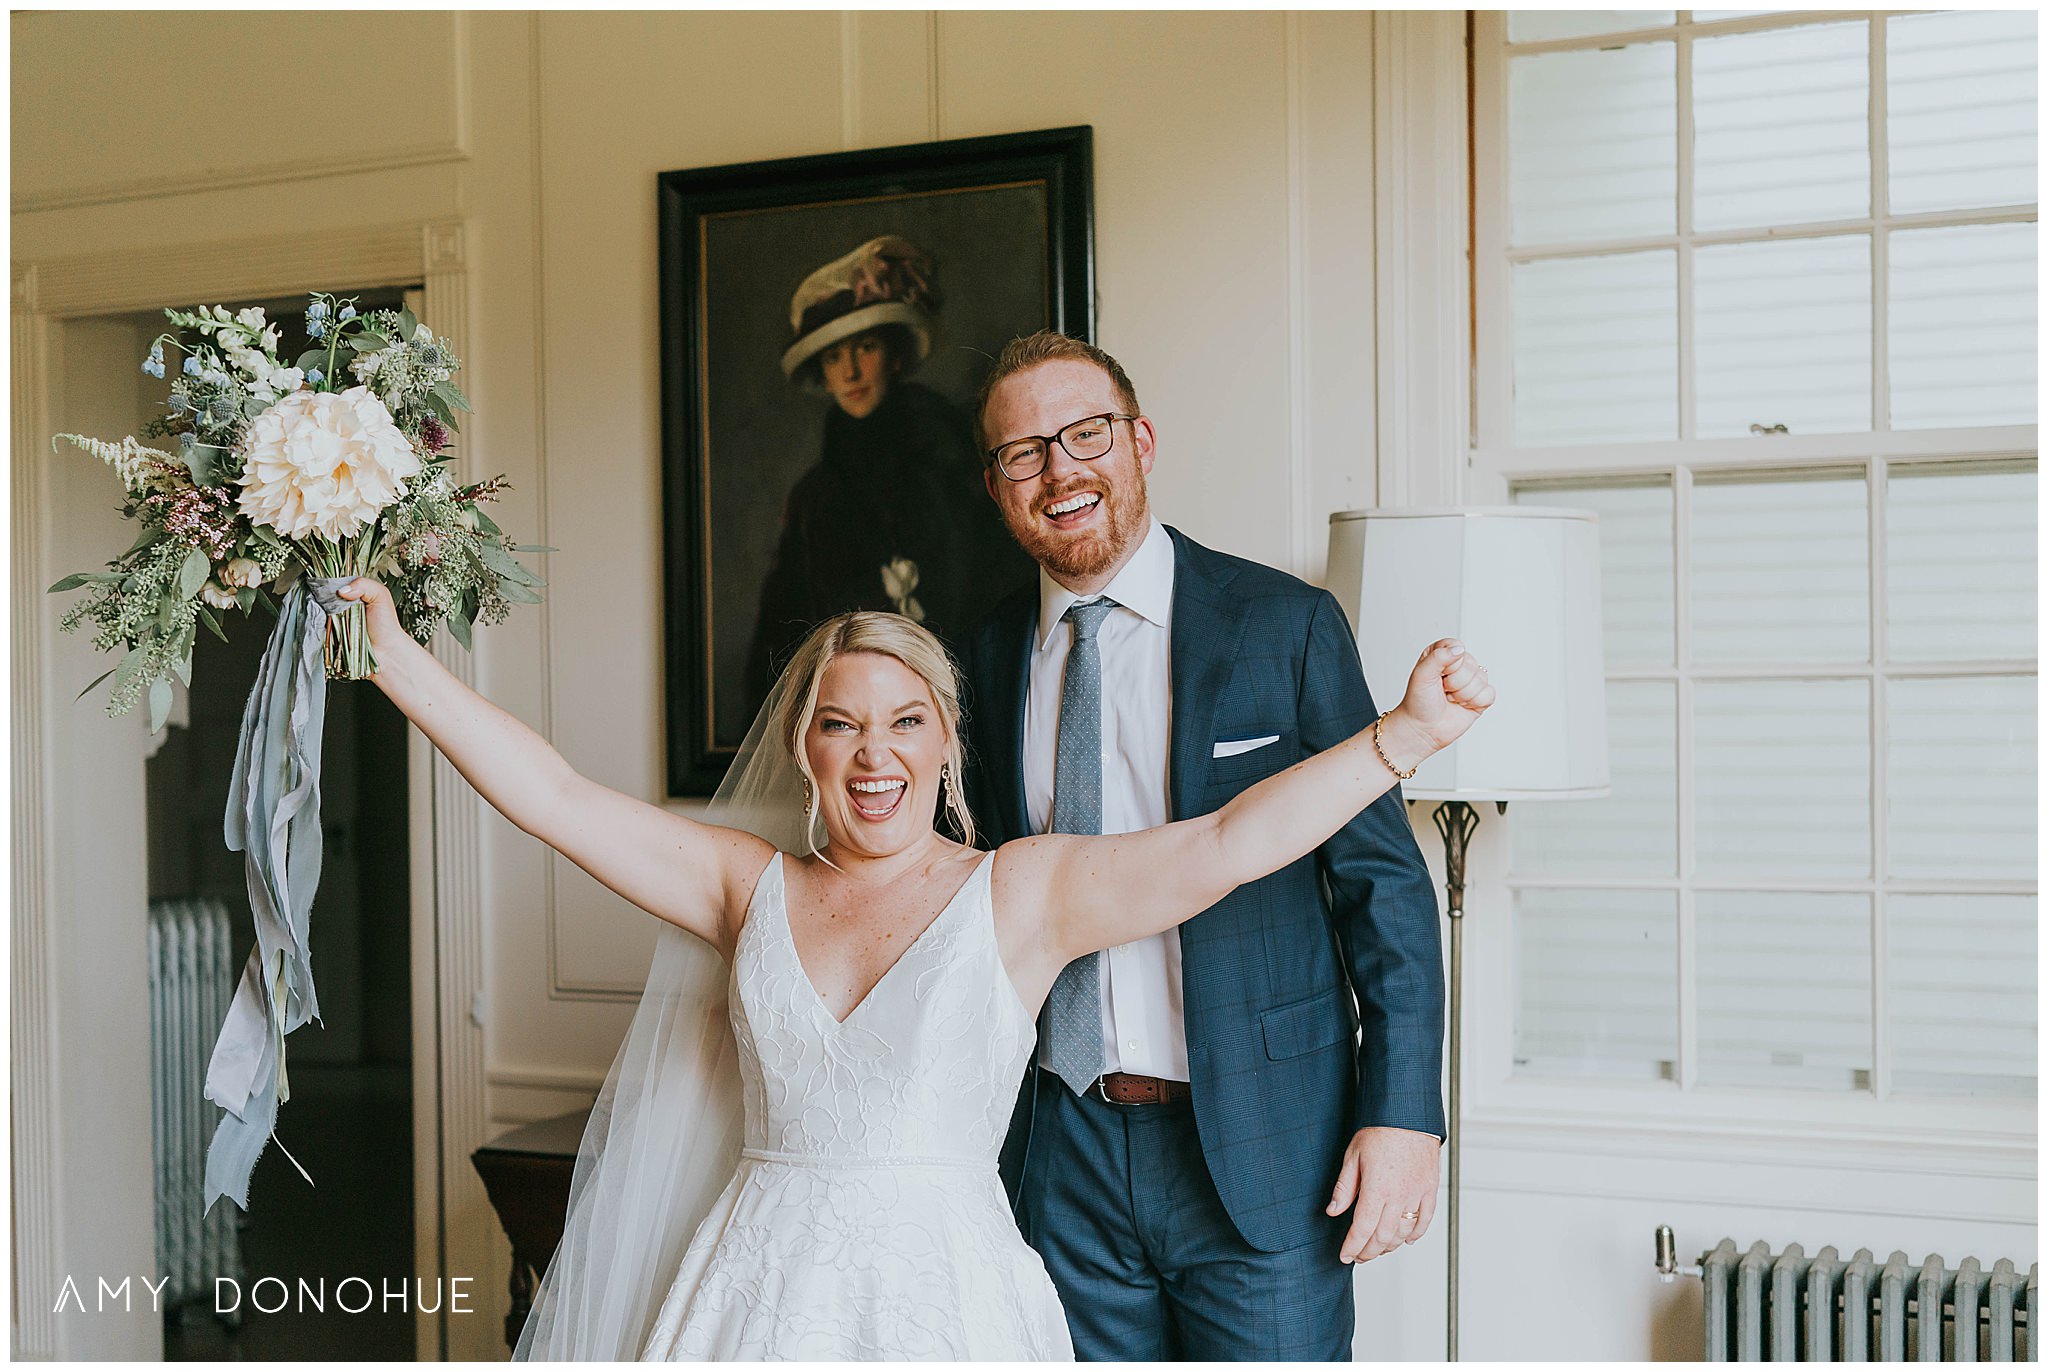 Ceremony | The Fells Estate | The Prism House Event Design & Wedding Planning | New Hampshire Wedding Photographer | © Amy Donohue Photography